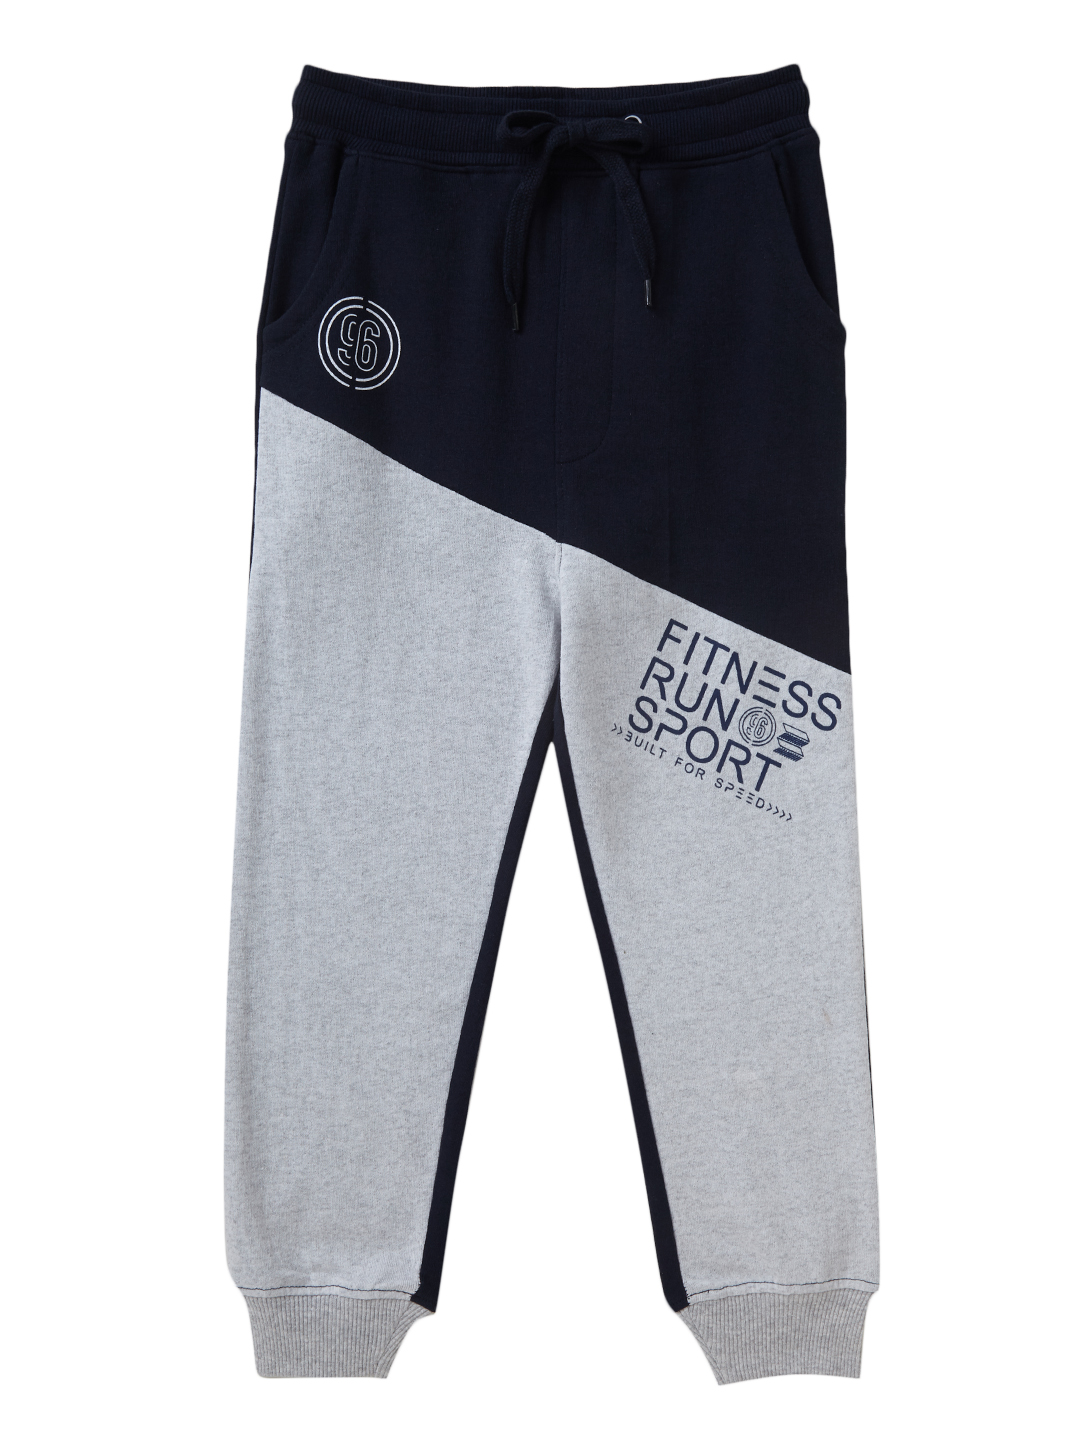 Boys Cotton Track Pant (Navy & Grey , 4-12 years)